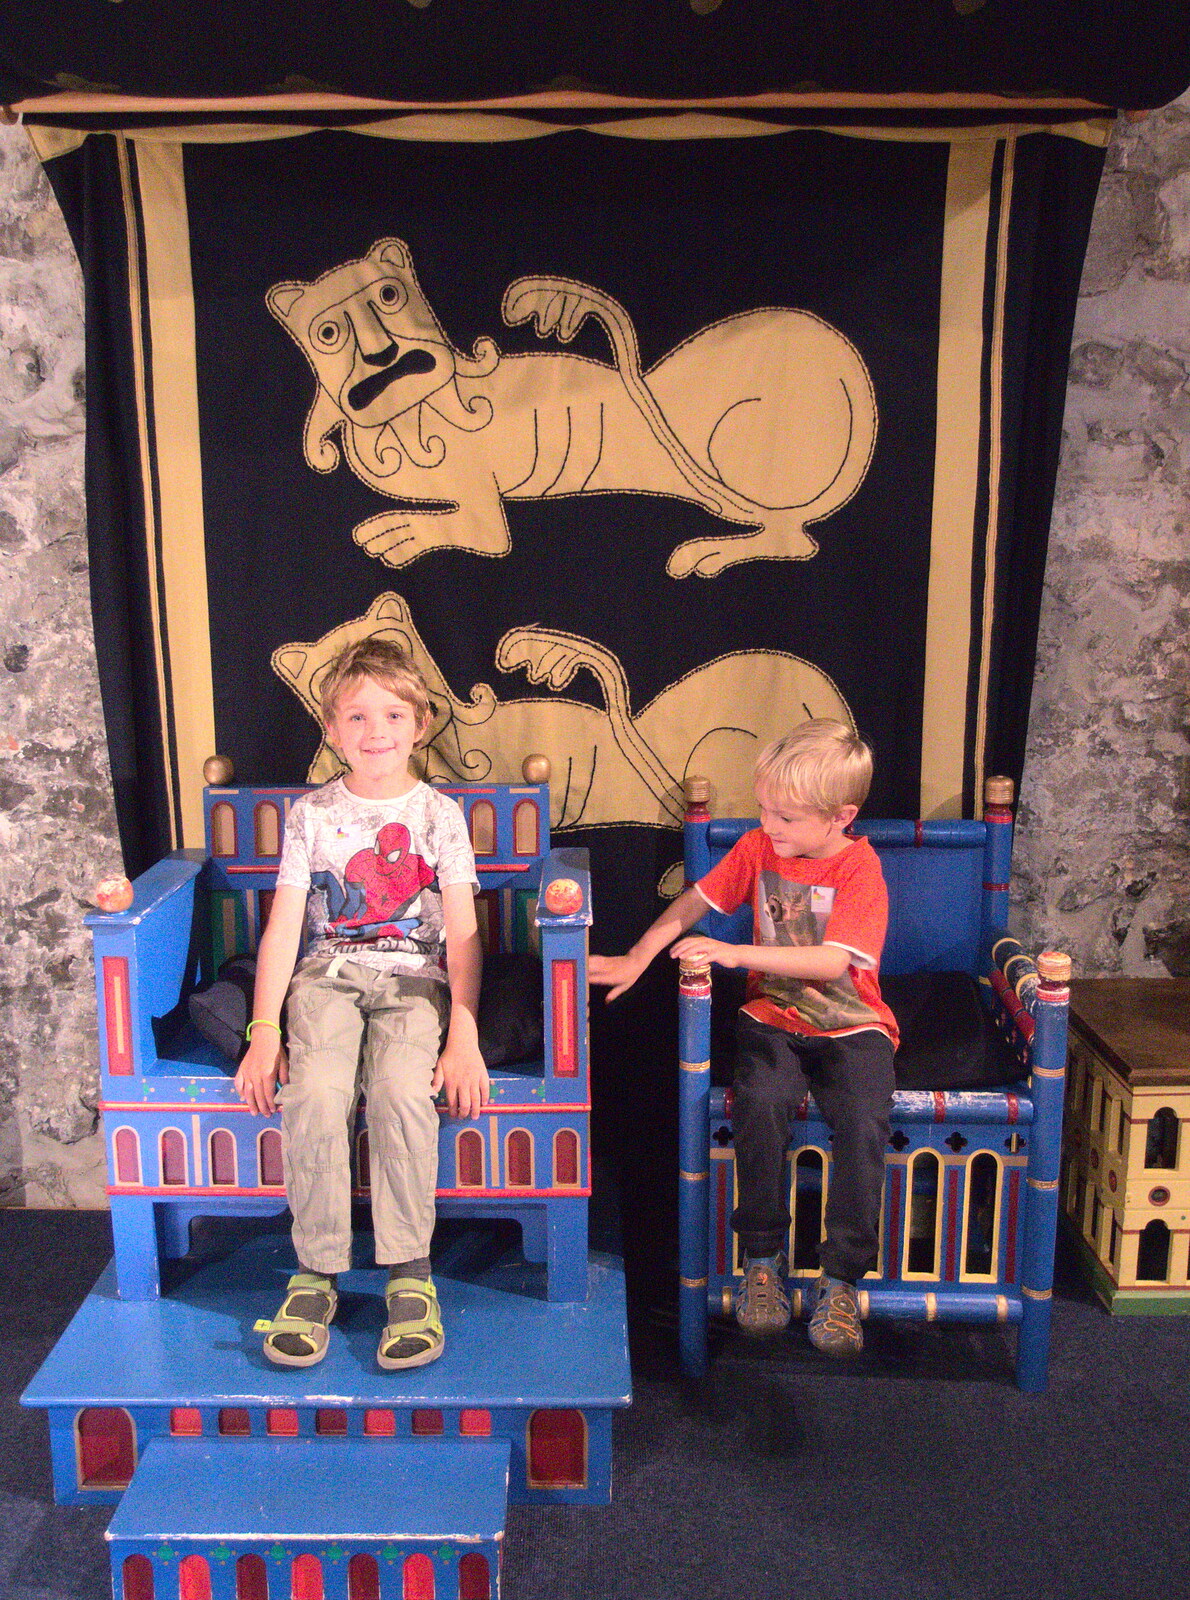 The boys sit on thrones from Swordfights at Norwich Castle, Norwich, Norfolk - 31st August 2016